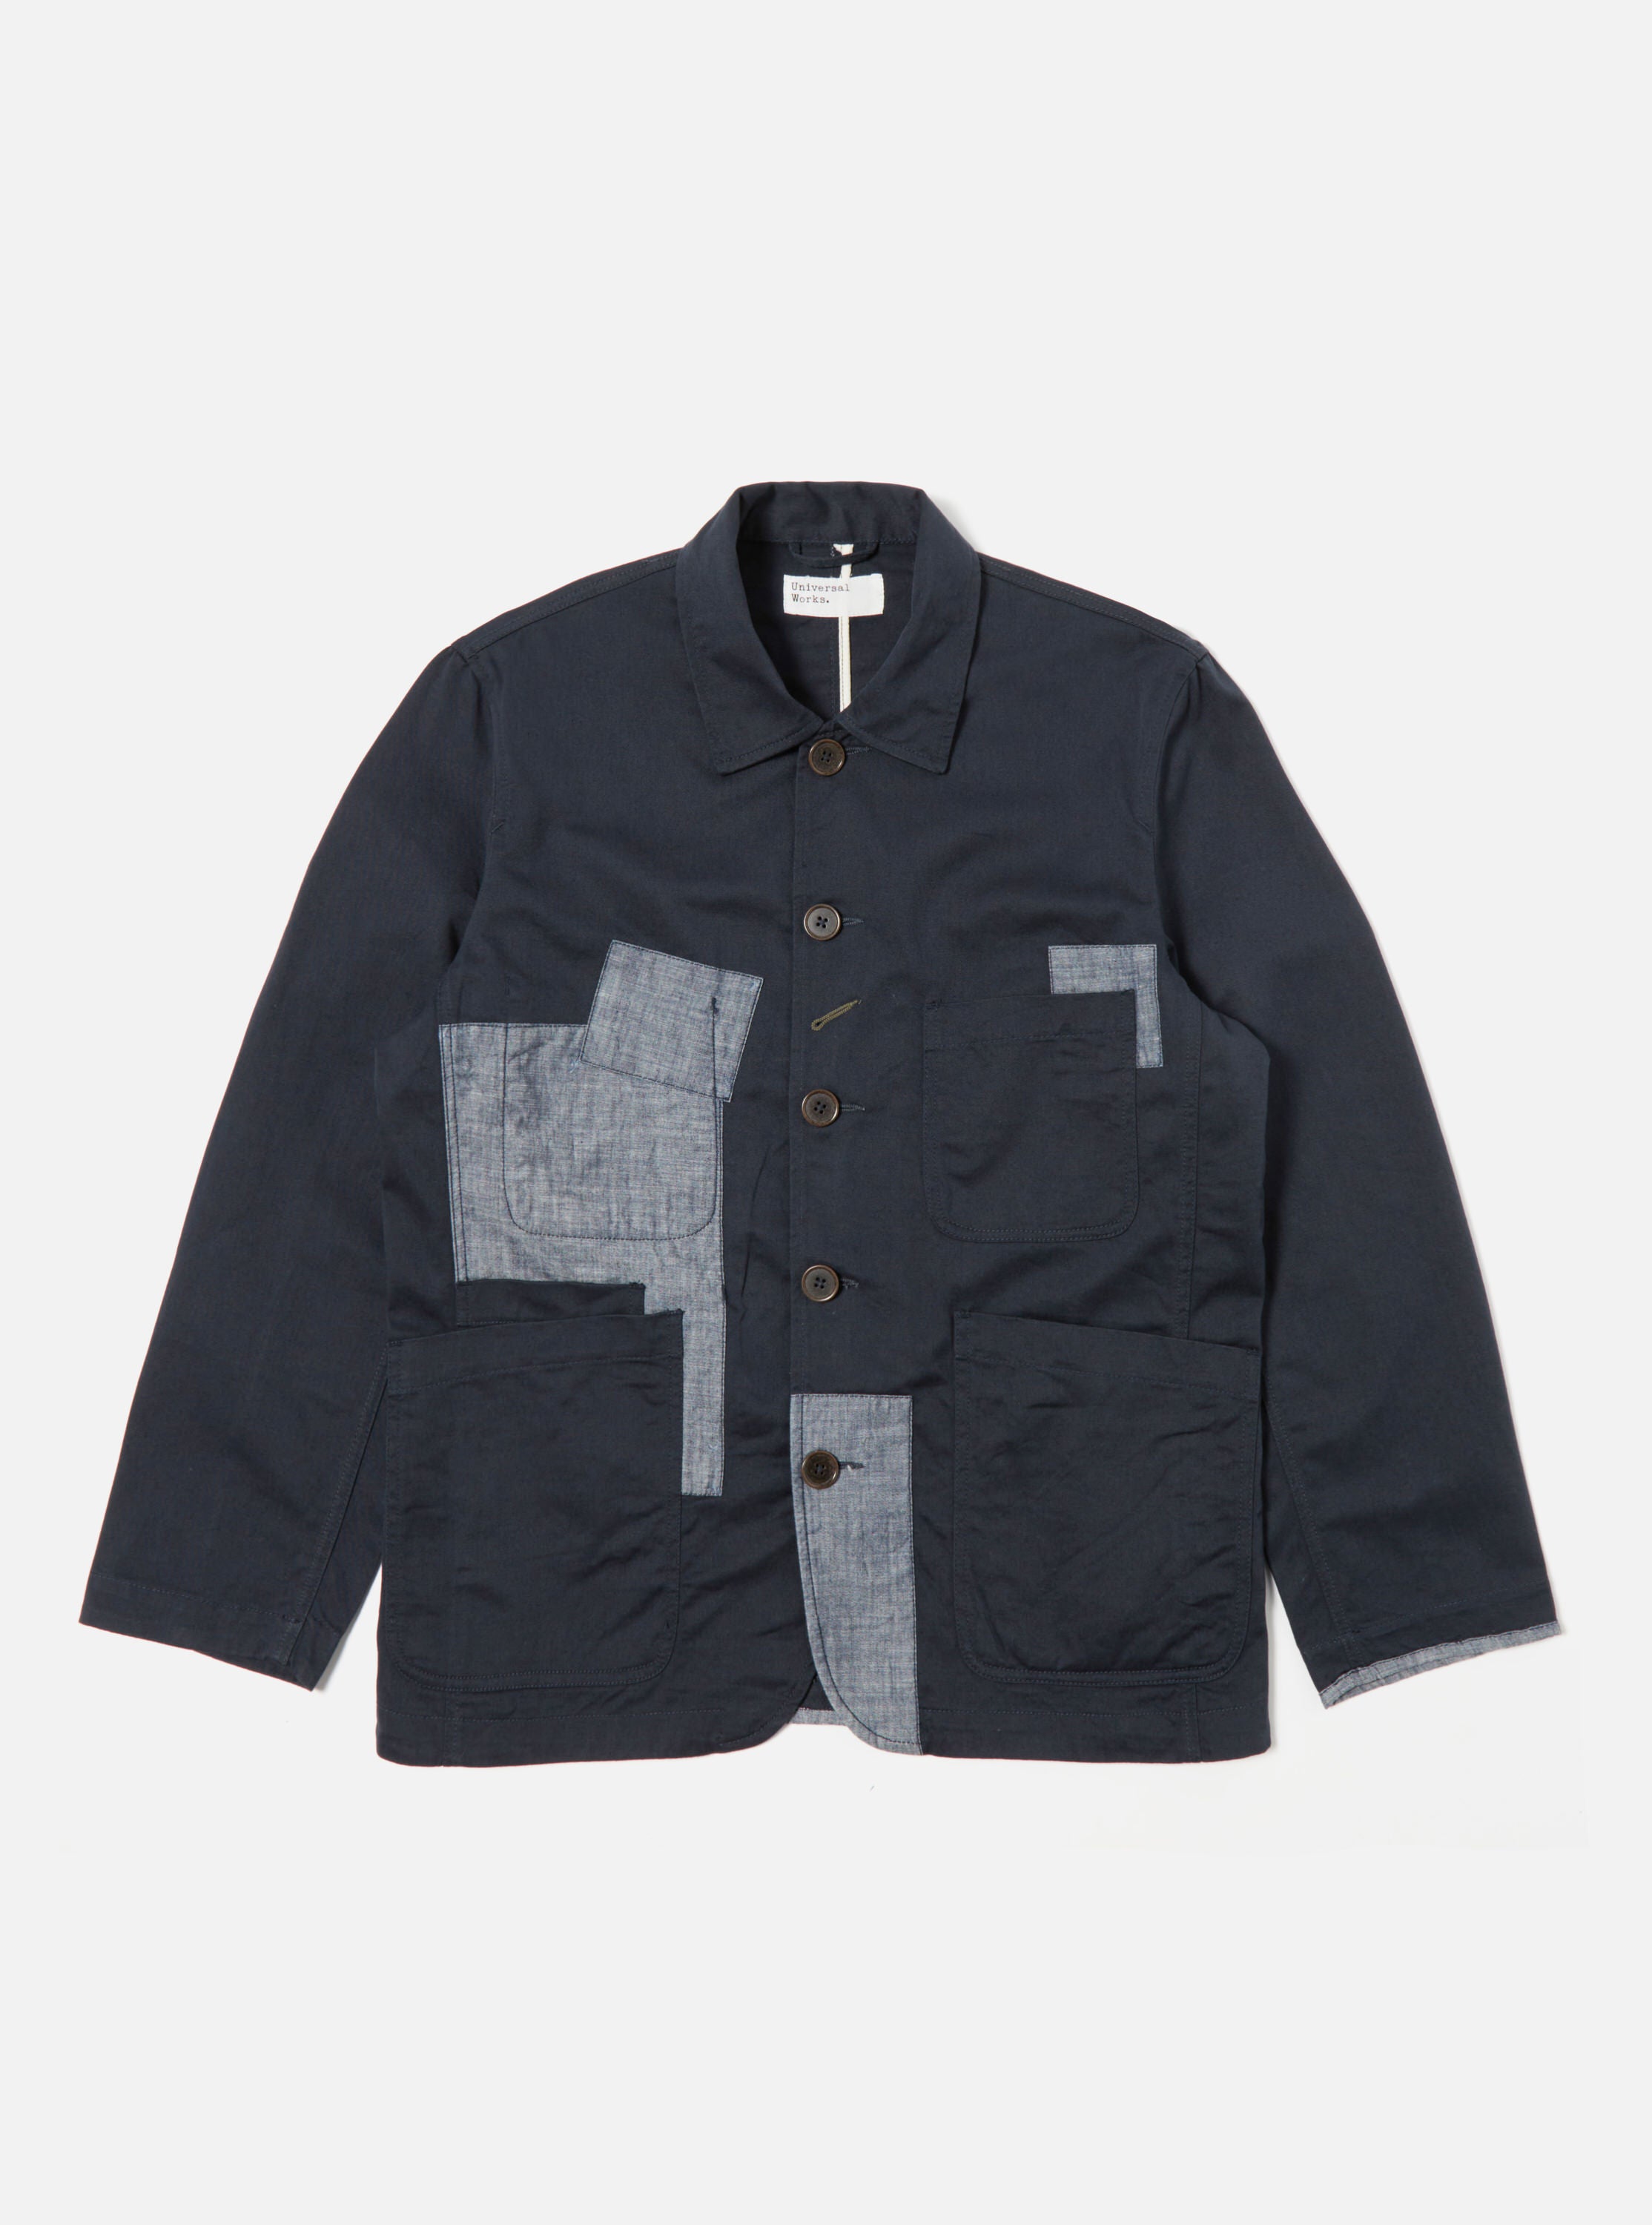 Universal Works Patched Bakers Jacket in Navy Twill/Chambray